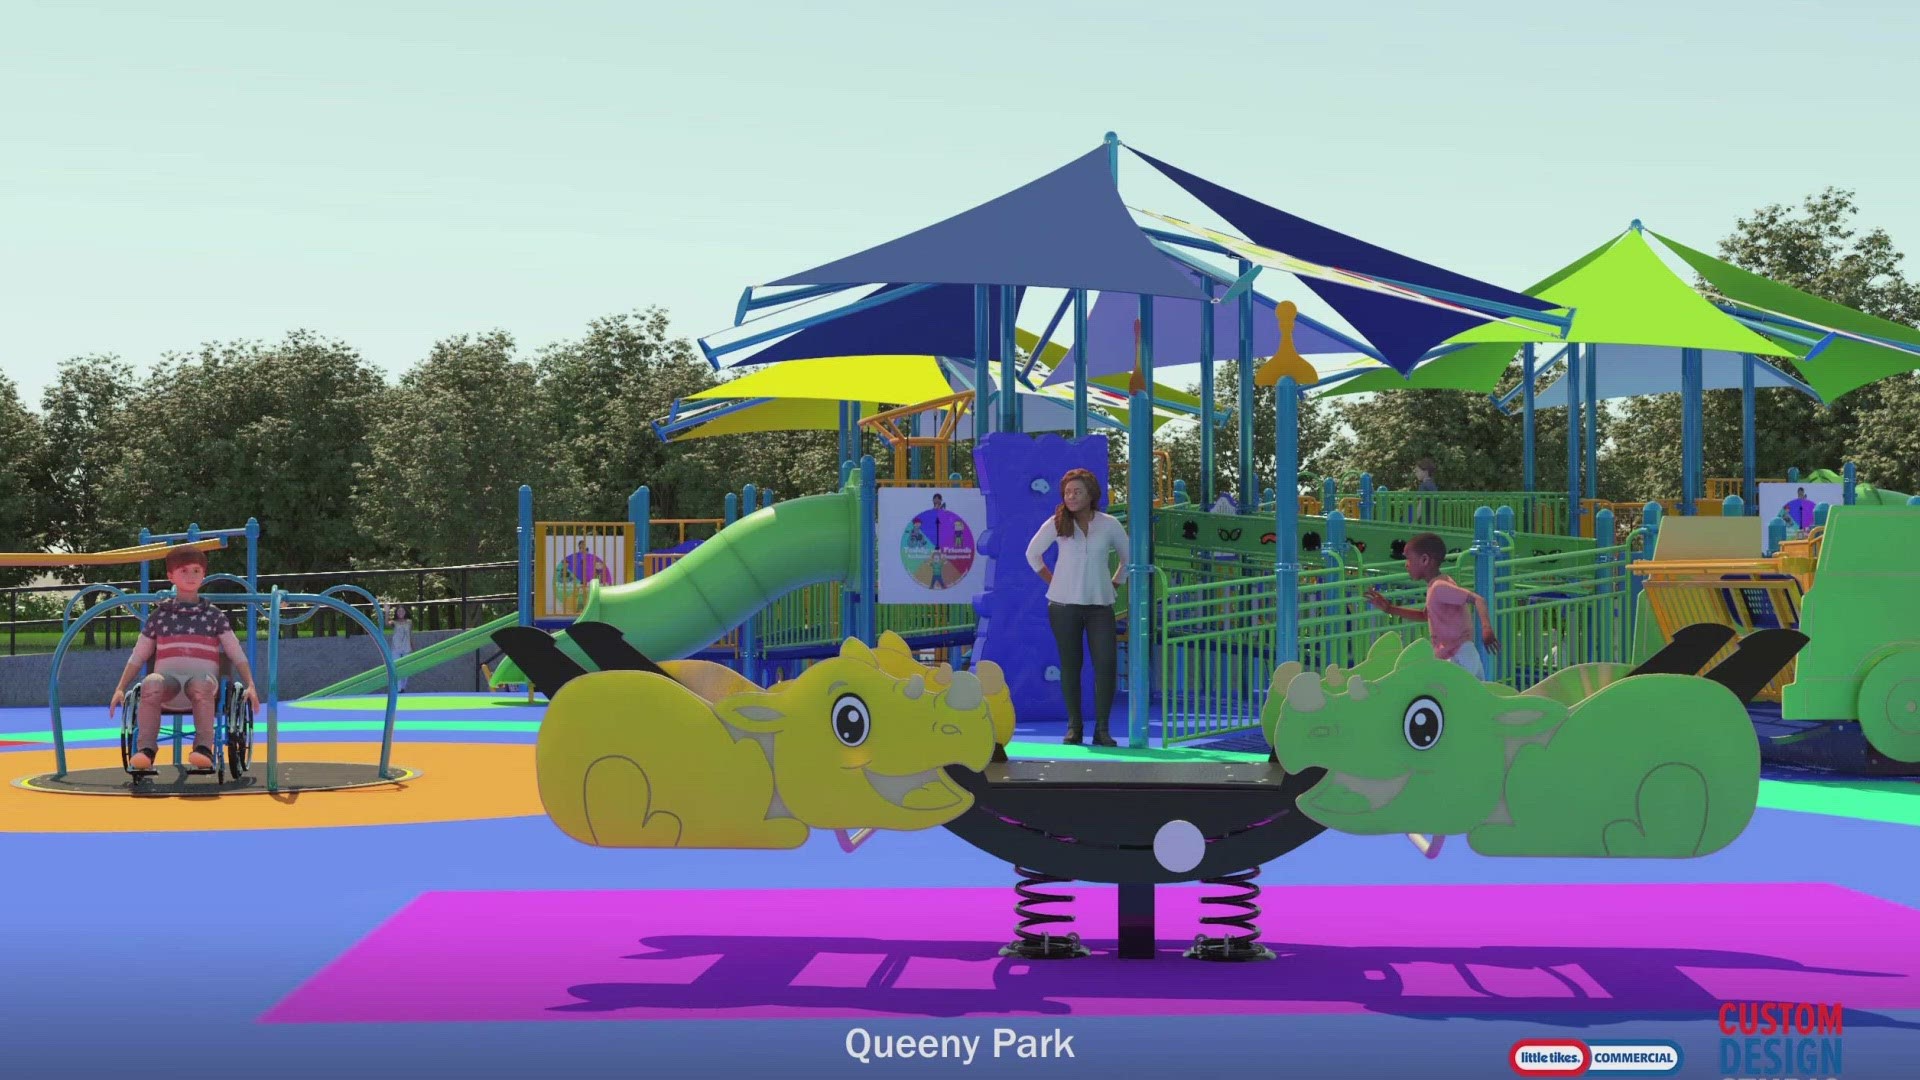 A local mom is teaming up with a nonprofit to build an inclusive playground in west St. Louis County. The project at Queeny Park has a $3.2 million price tag.